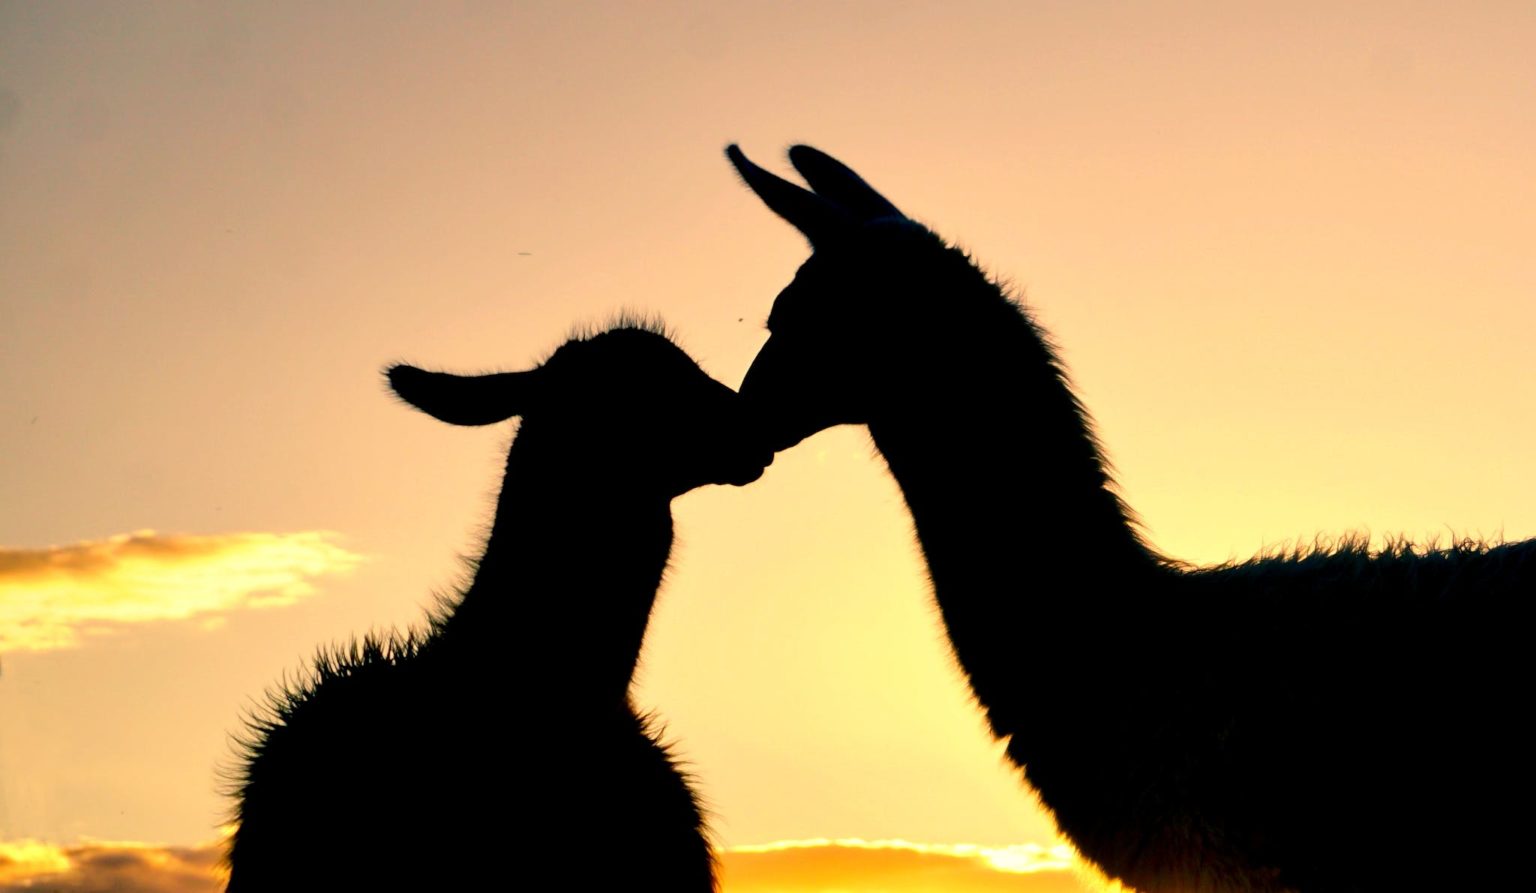 Alpacas Silhouettes at Sunset